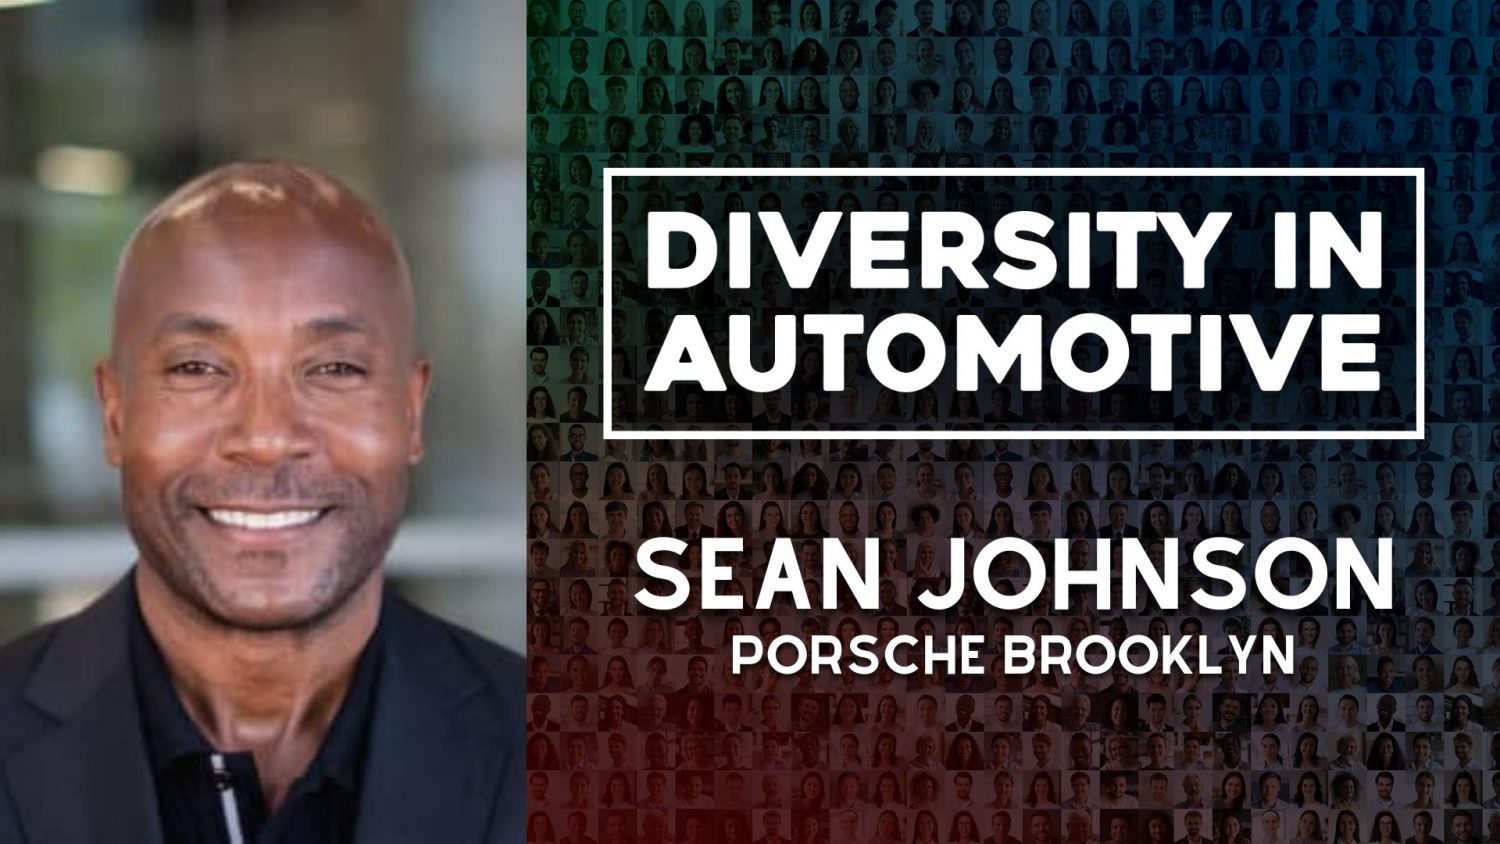 Sean Johnson joins the first-ever episode of Diversity in Automotive on CBT News to discuss the challenges to creating a diverse workforce.